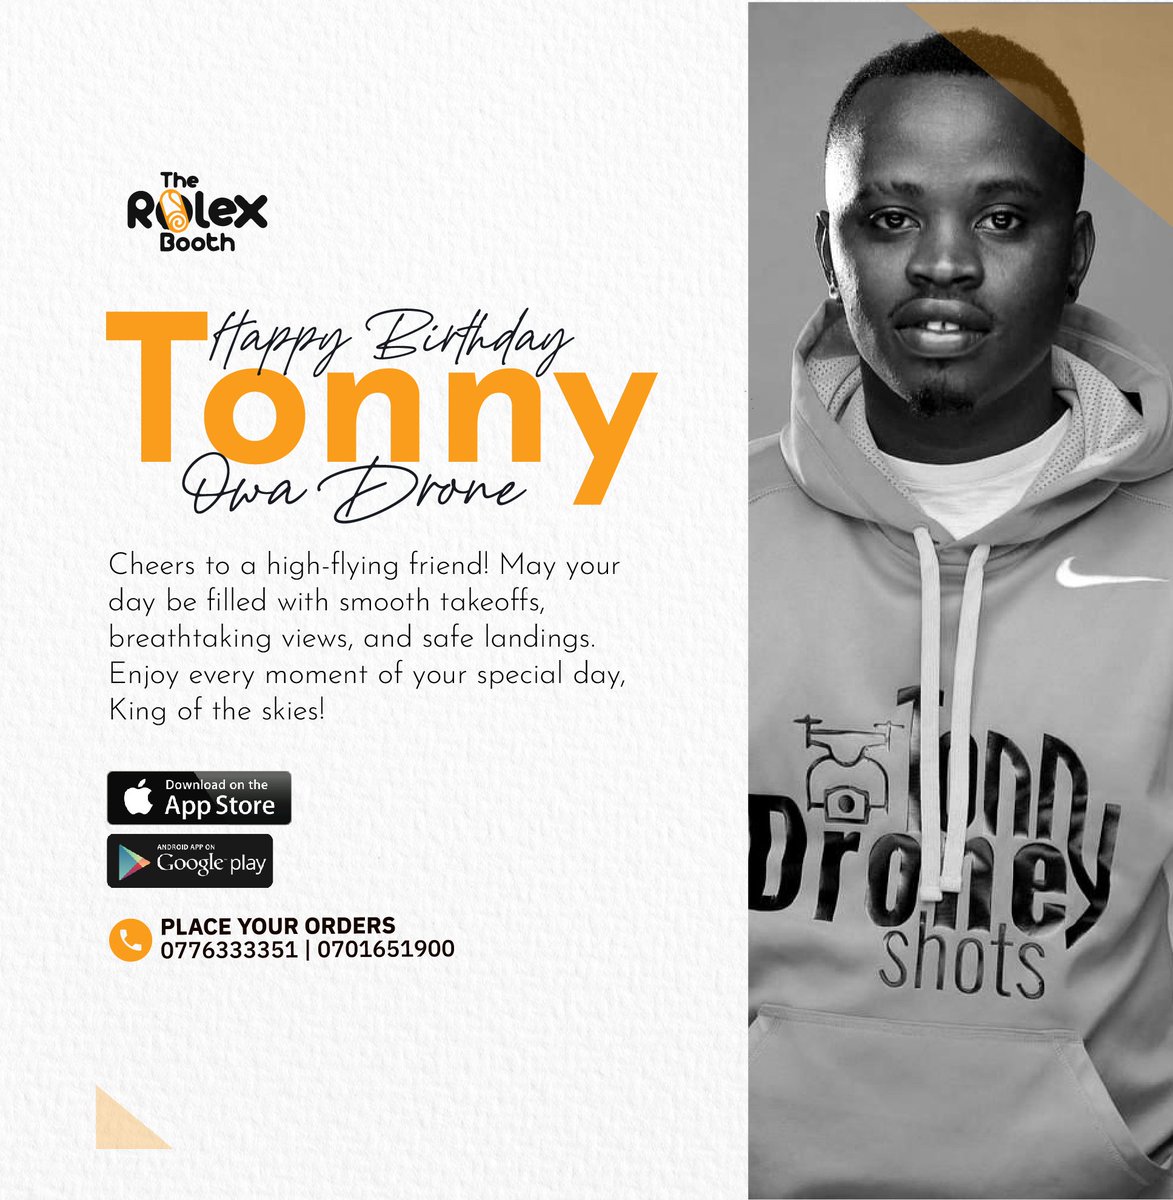 A happy birthday to the one and only certified drone master in the area. Enjoy your day @tonnydroneshots Blessings sir. #VisitRolexBooth